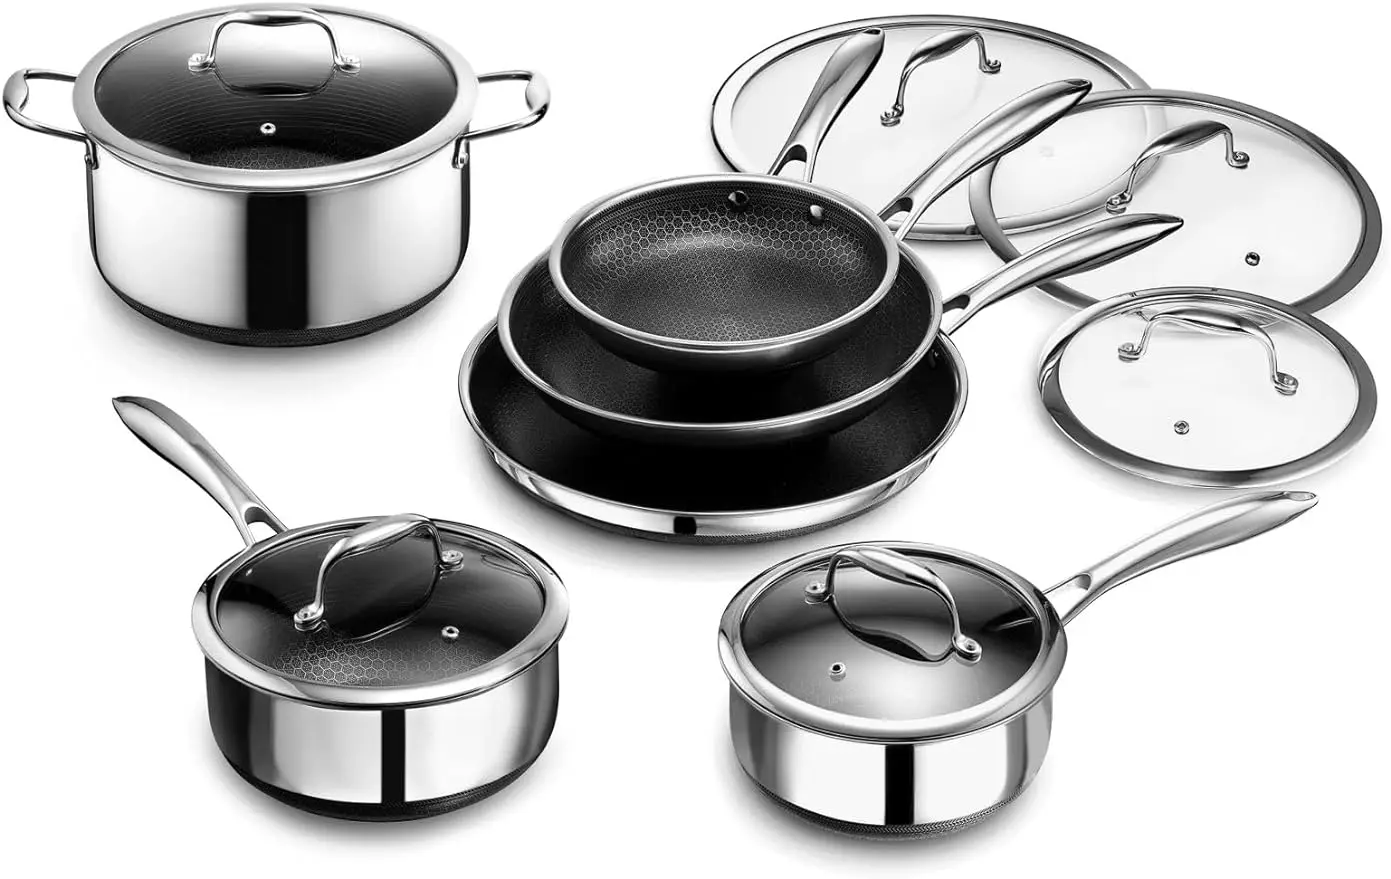 

12 Piece Hybrid Stainless Steel Cookware Set - 6 Piece Frying Pan Set and 6 Piece Pot Set with Lids, Stay Cool Handles